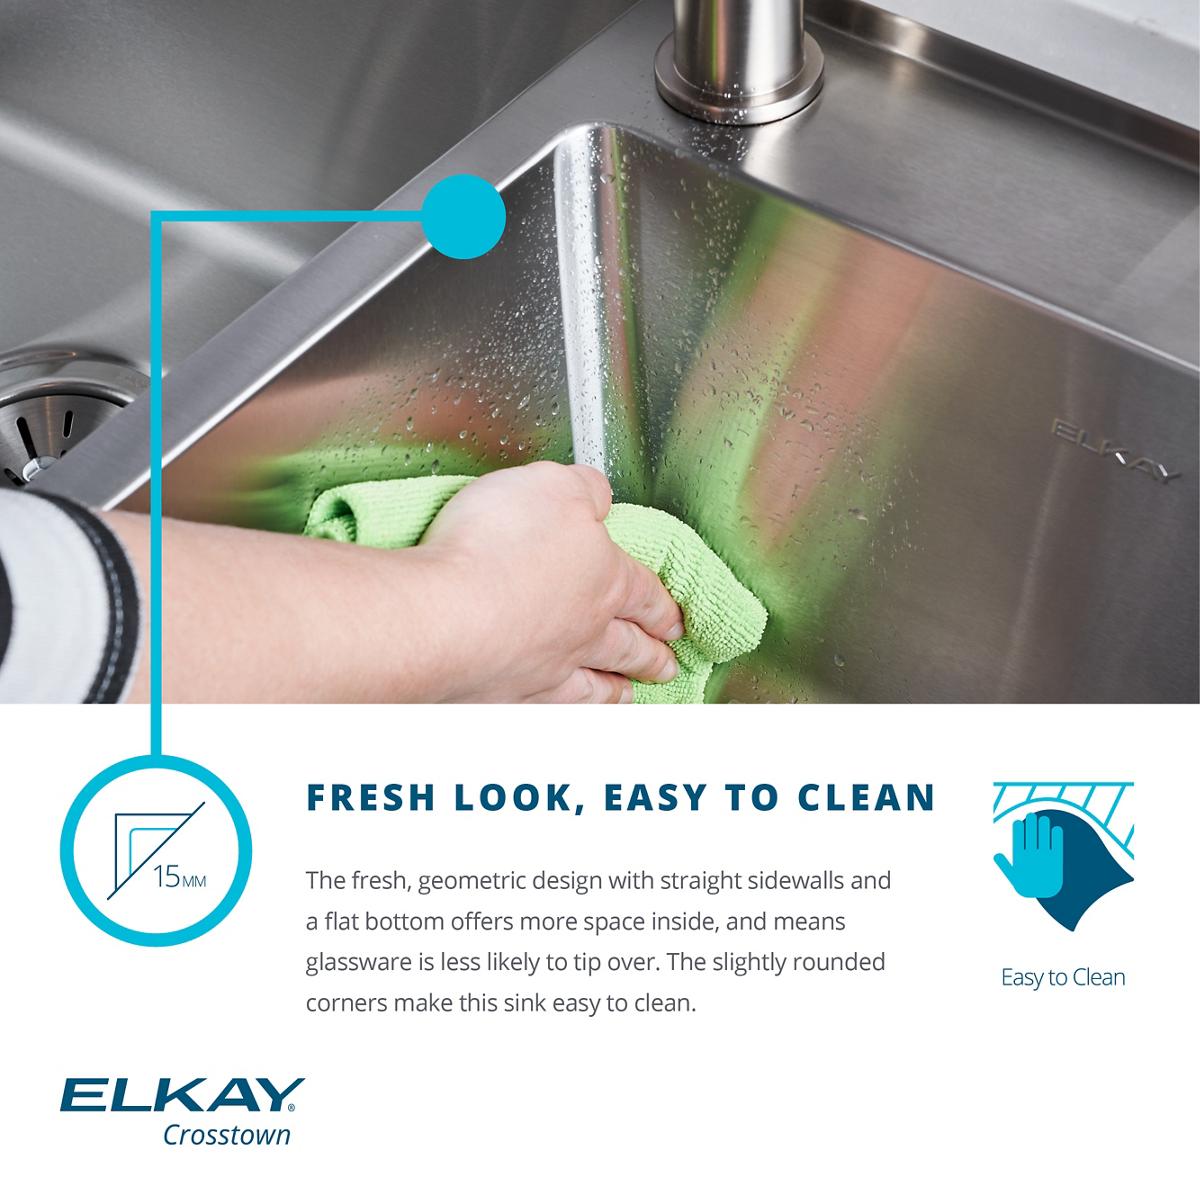 Elkay Crosstown 18 Gauge Stainless Steel 33" x 22" x 9", Equal Double Bowl Dual Mount Sink Kit with Aqua Divide and Faucet-Kitchen Sink & Faucet Combos-Elkay